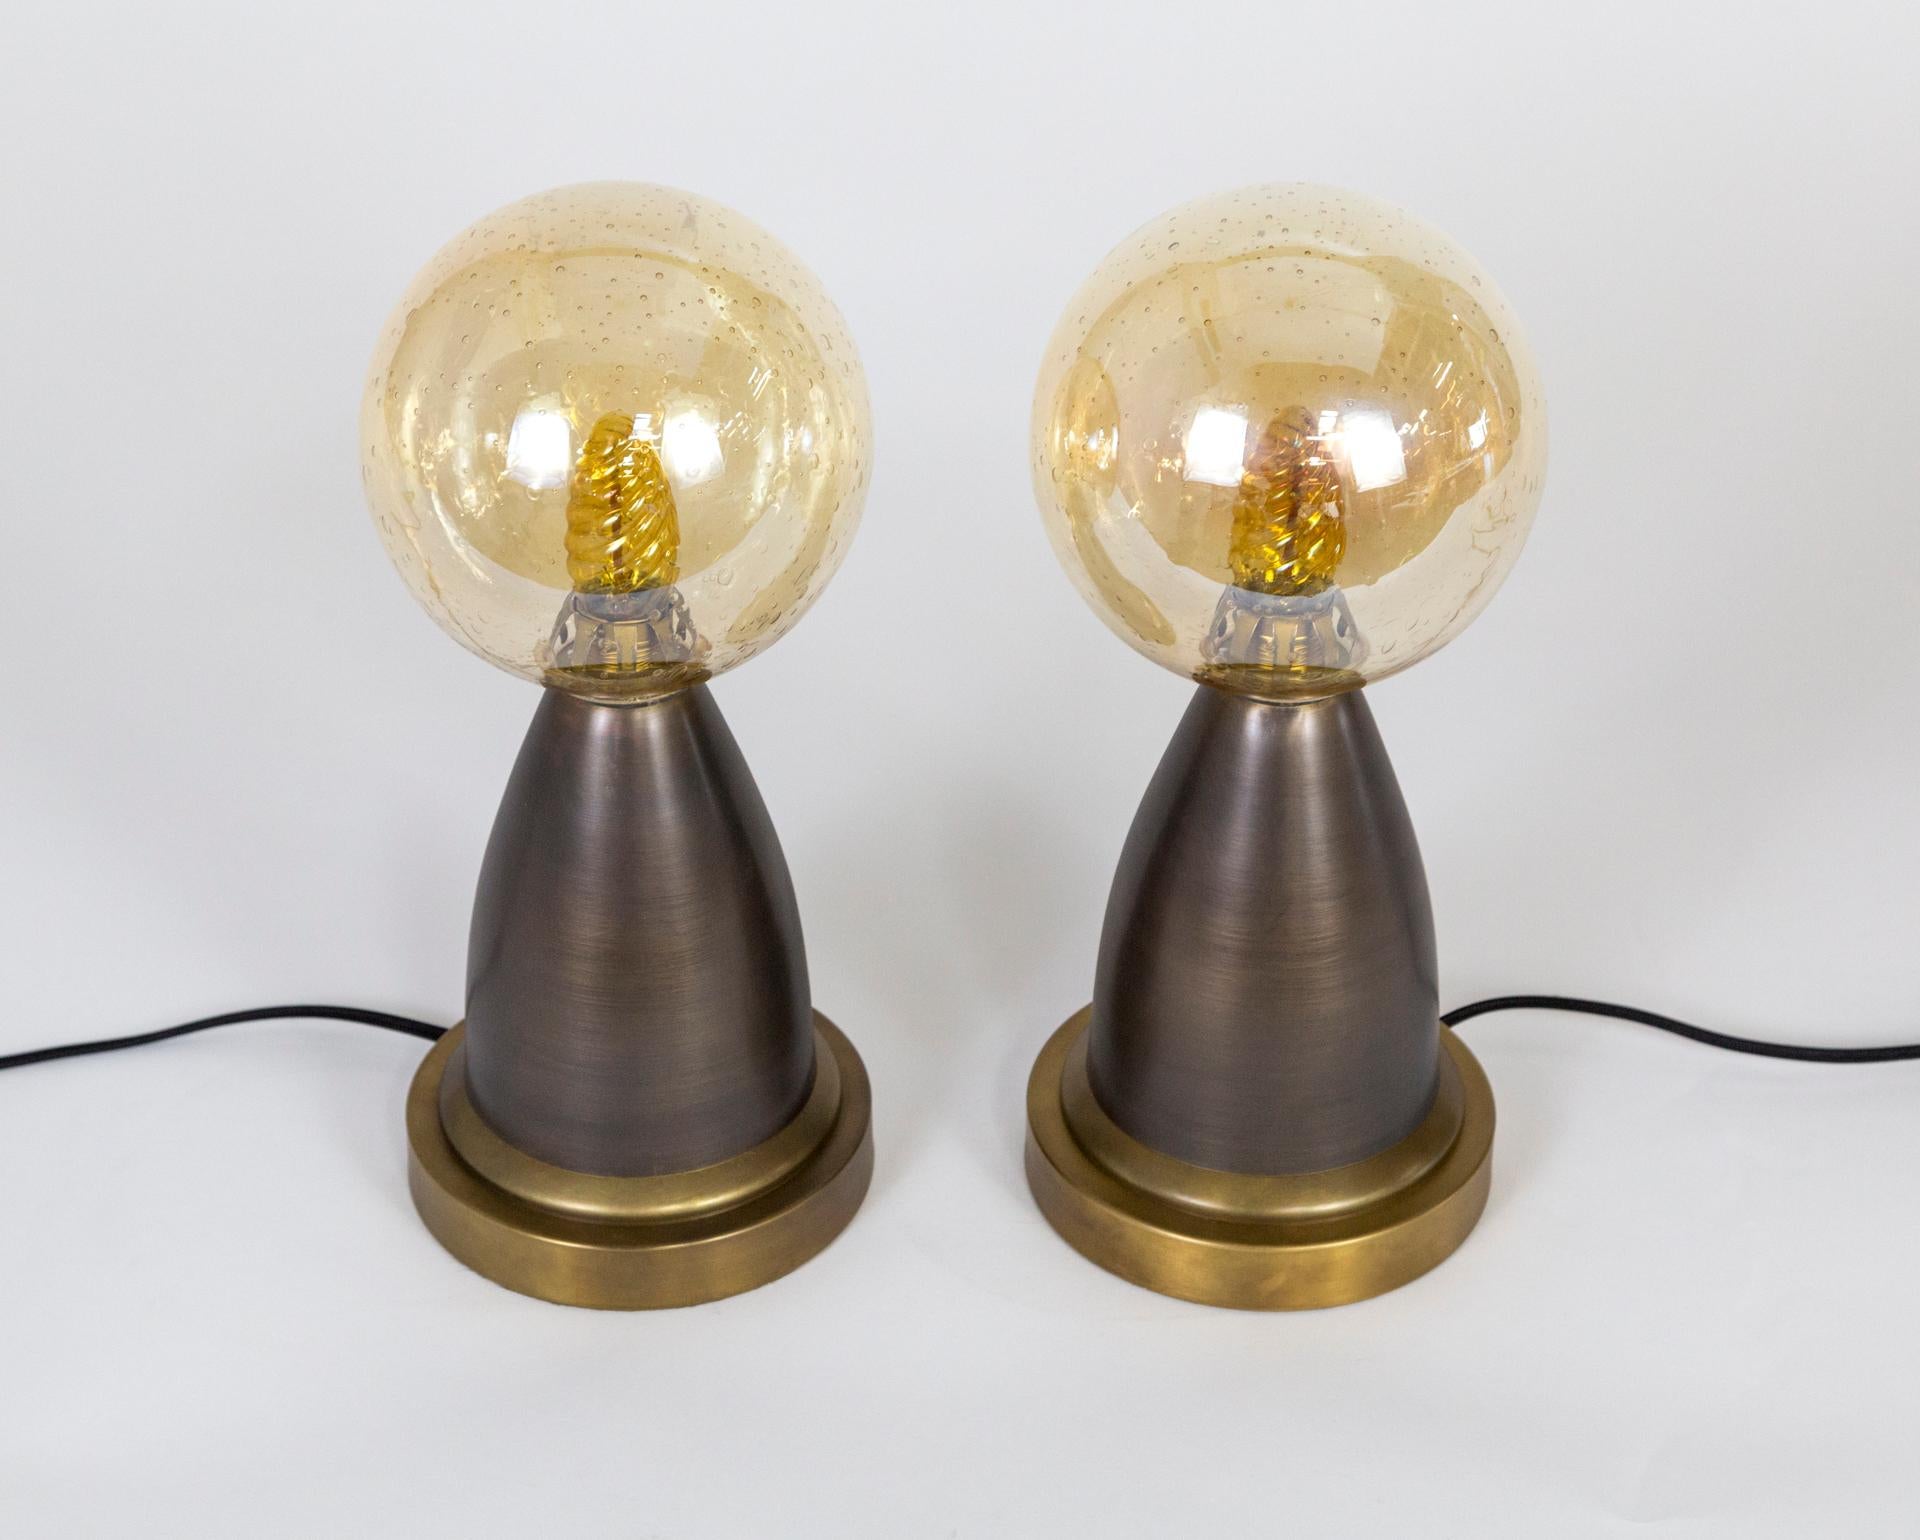 Modern and Minimalist; this petite brass pair of table lamps feature amber seeded glass globes. Each has a felted bottom, on/off switch on the cord and one E12 candelabra socket. Measures: 13.5